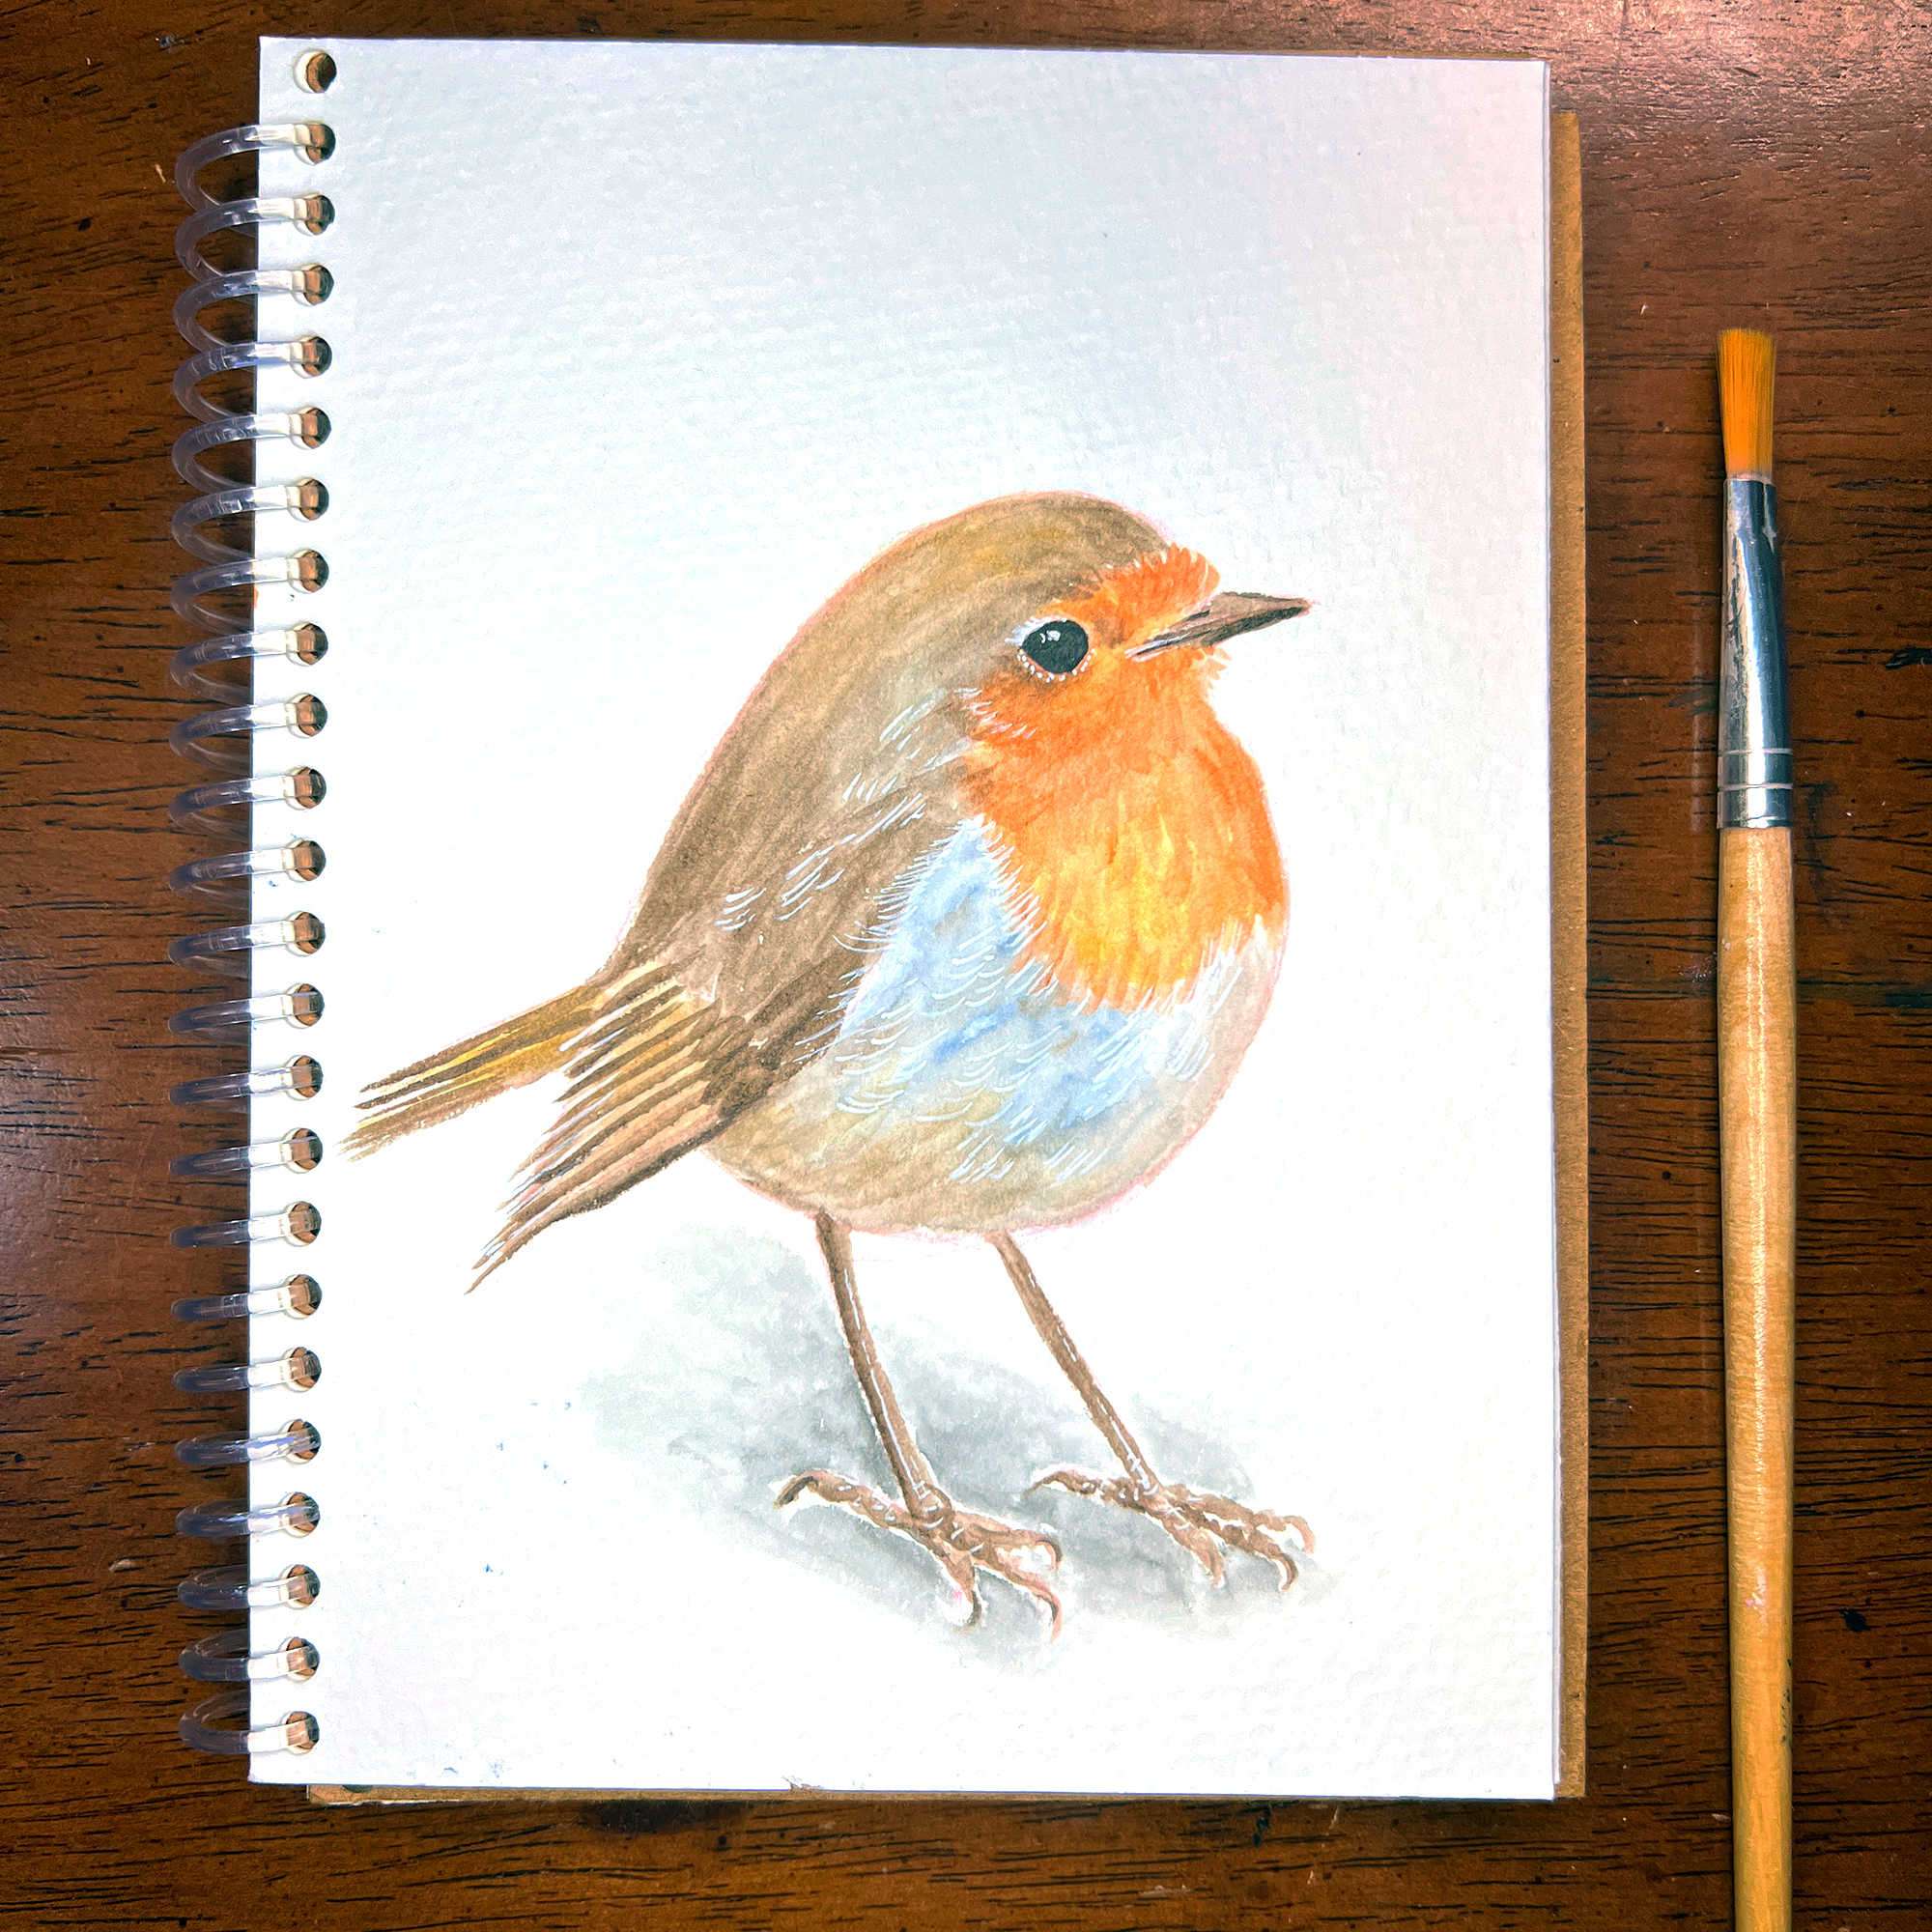 Watercolor robin sketch on a sketchbook beside a paintbrush on a wooden surface.